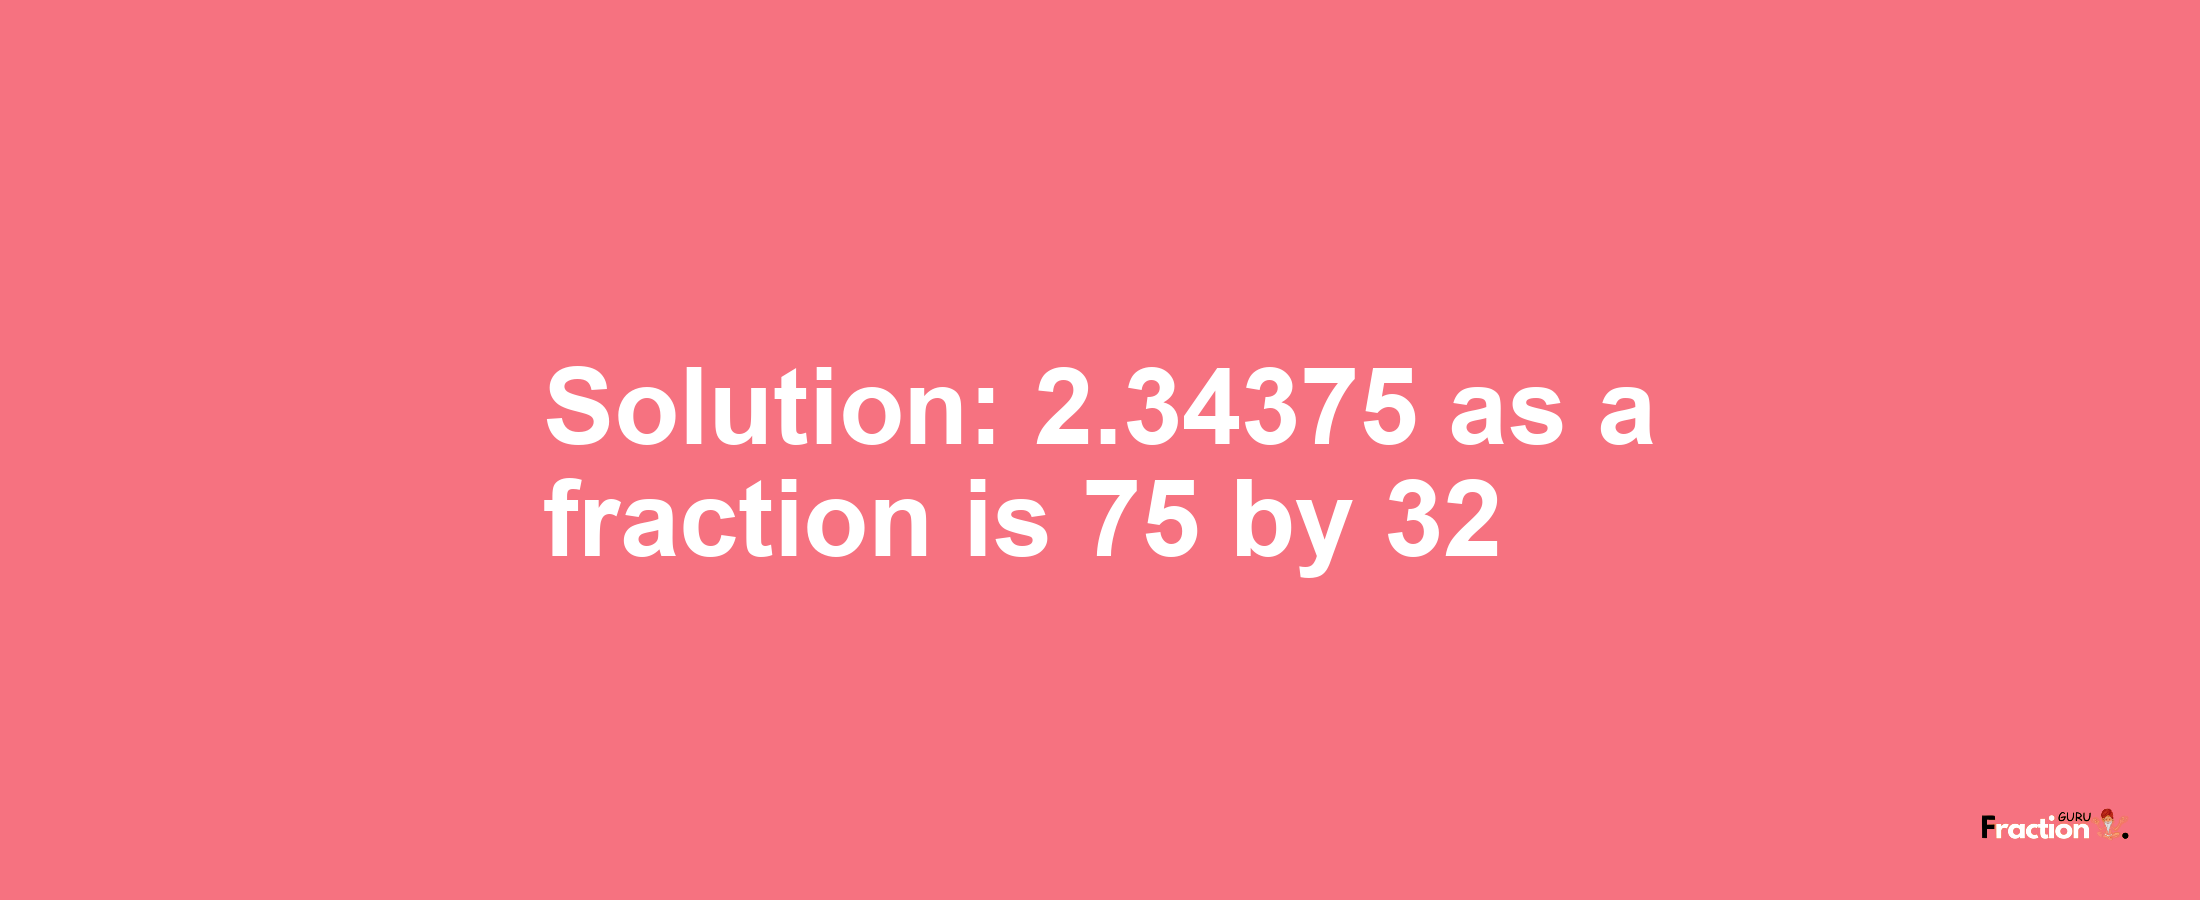 Solution:2.34375 as a fraction is 75/32